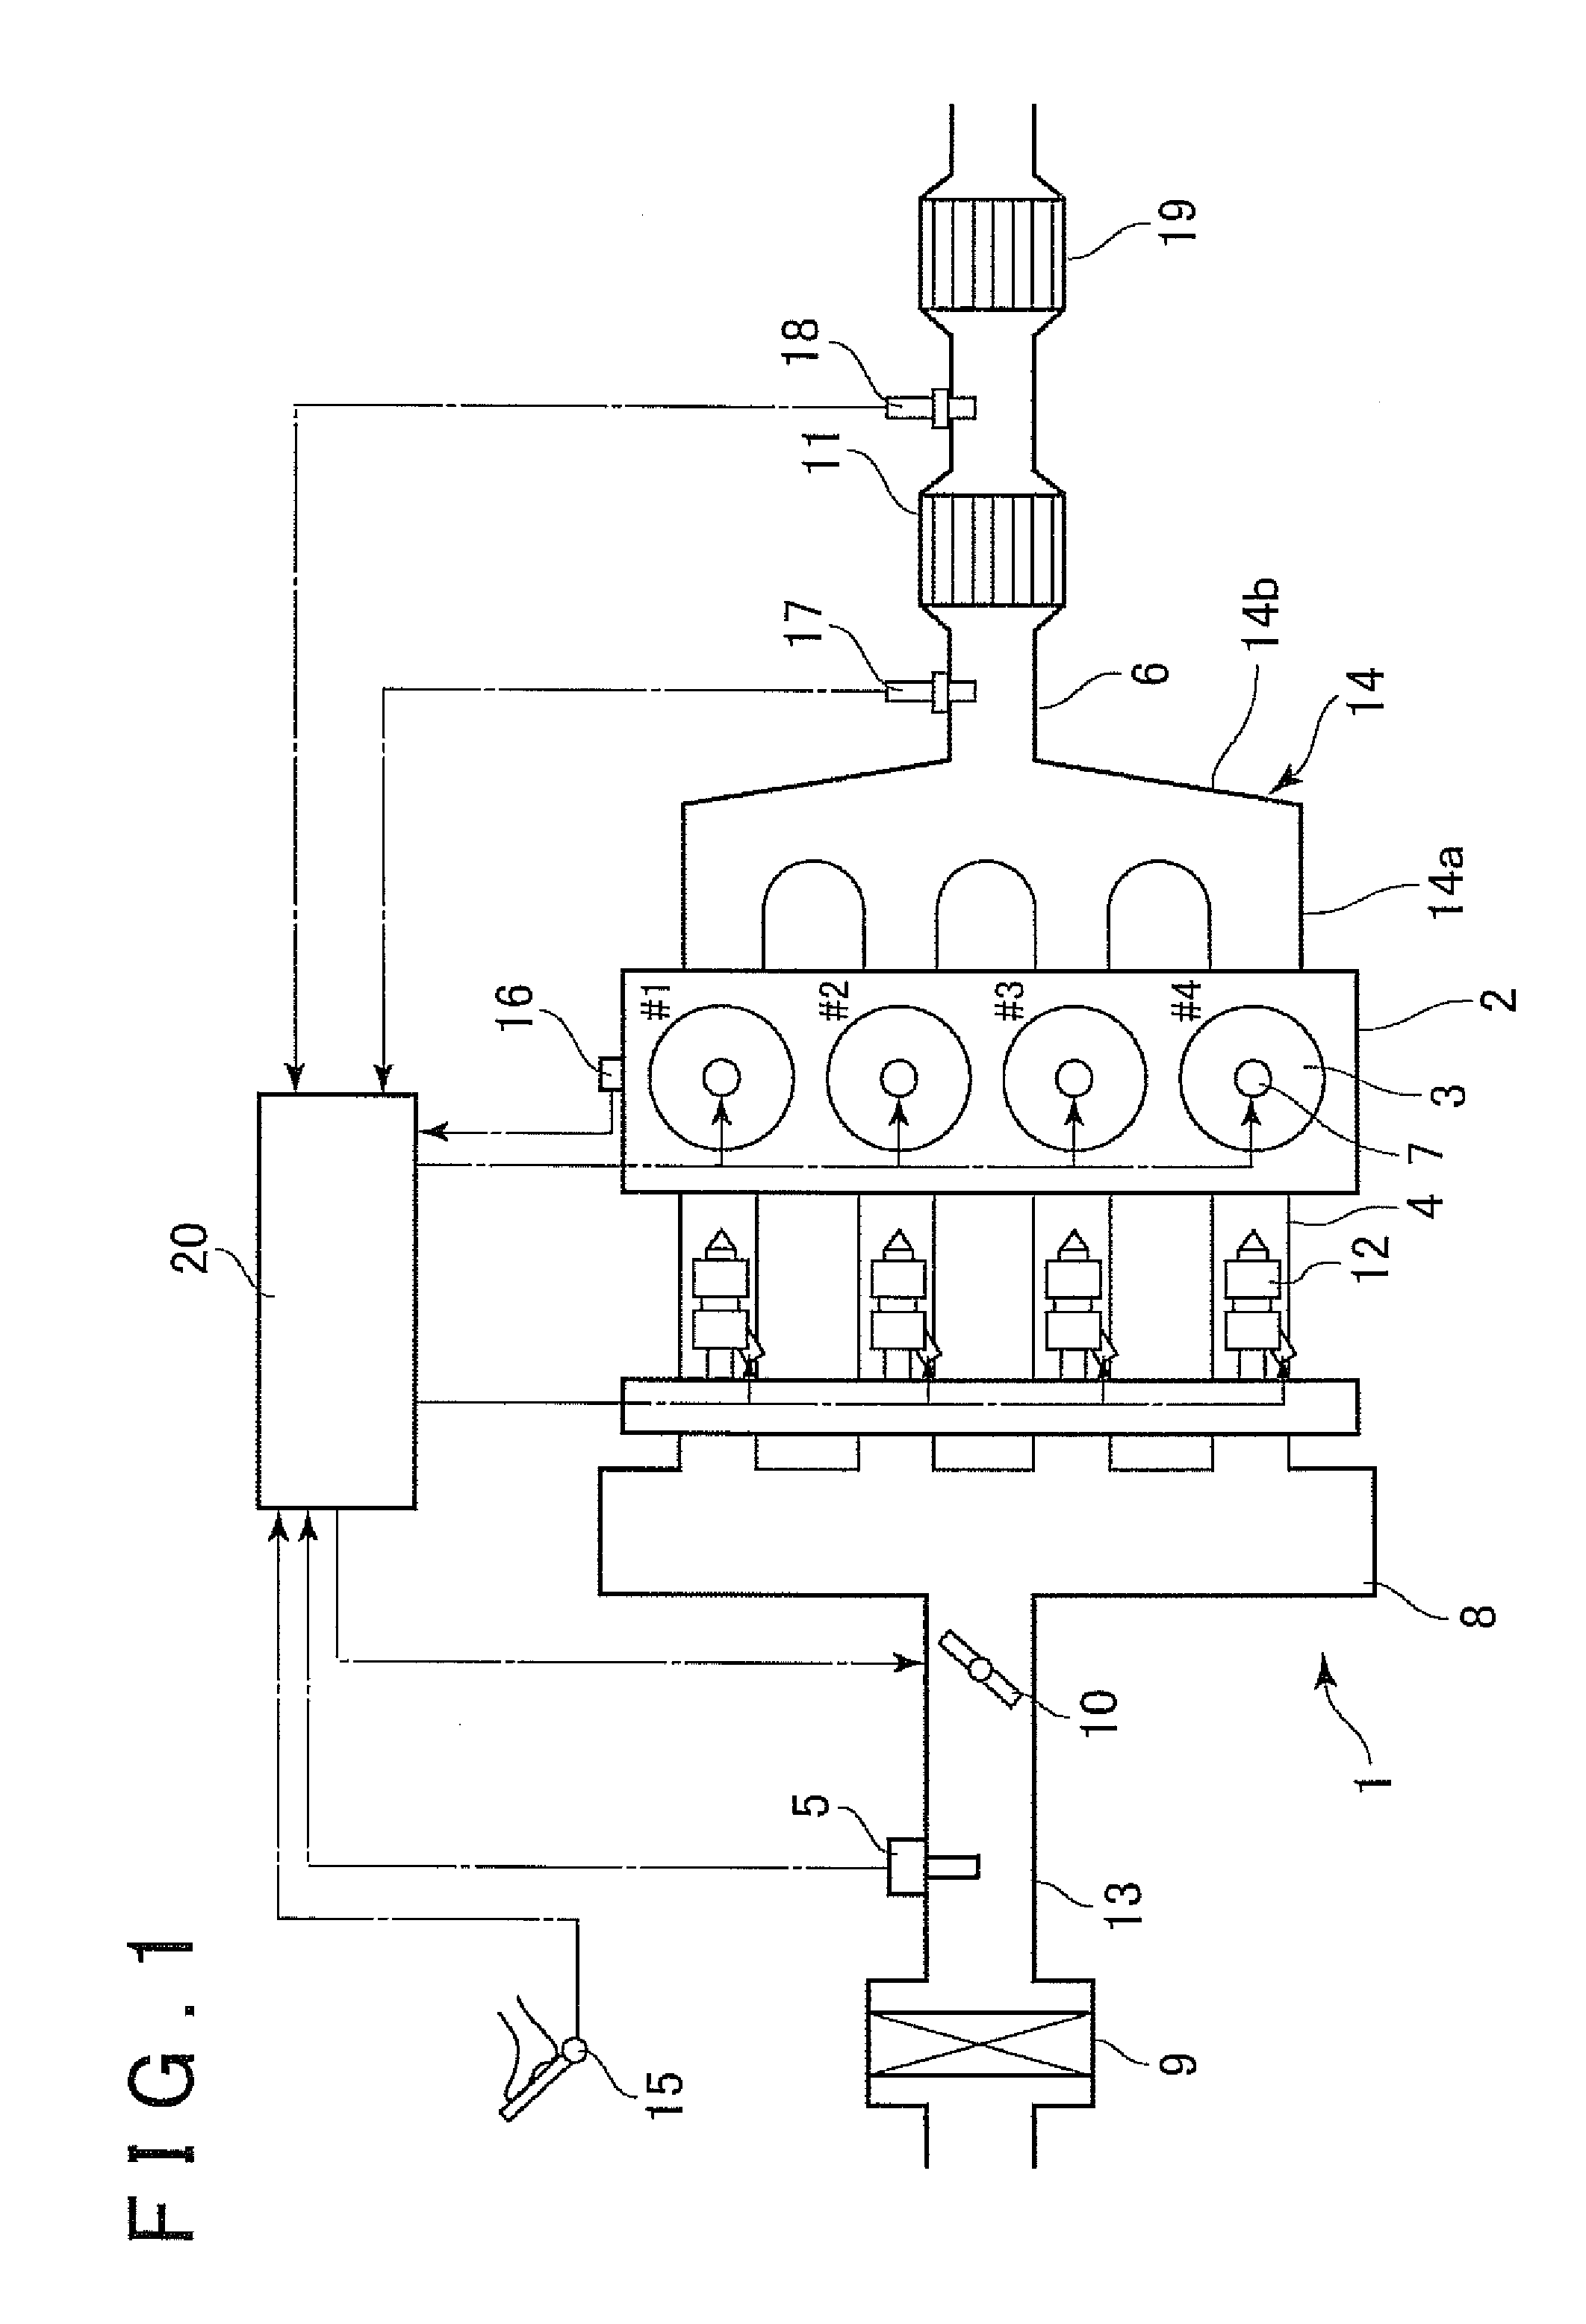 Apparatus and method for detecting abnormal air-fuel ratio variation between cylinders